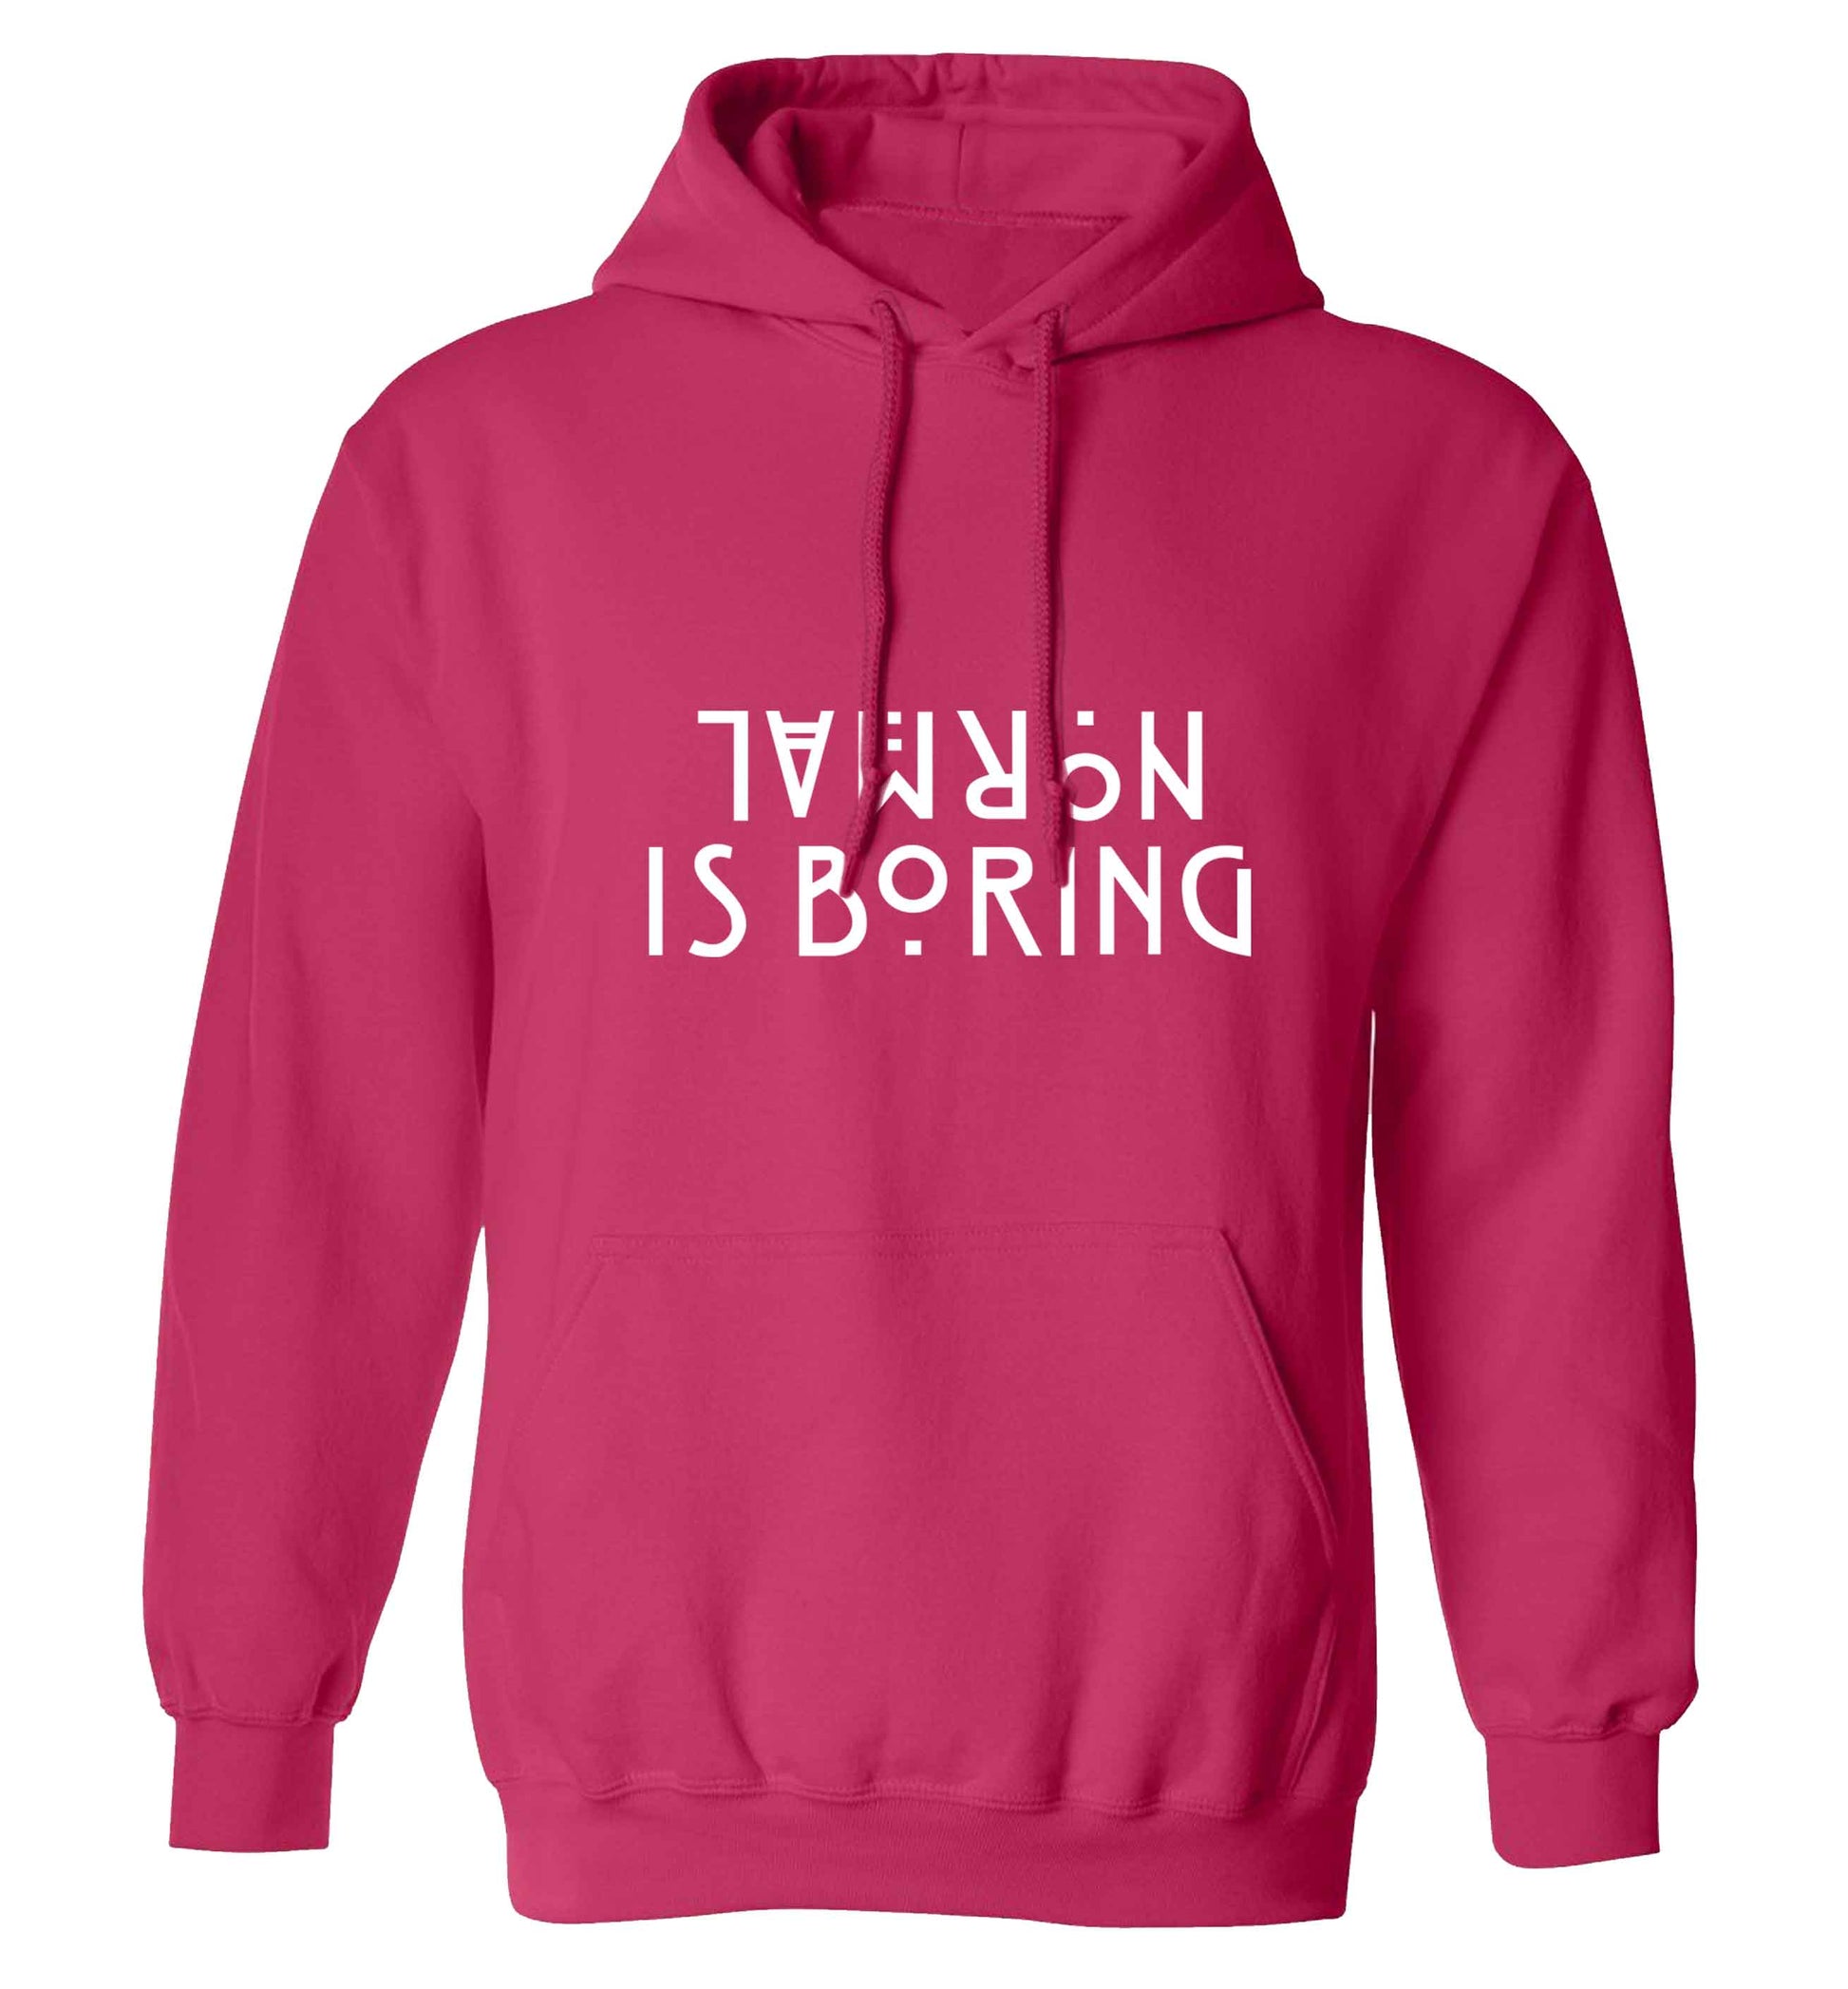 Normal is boring adults unisex pink hoodie 2XL